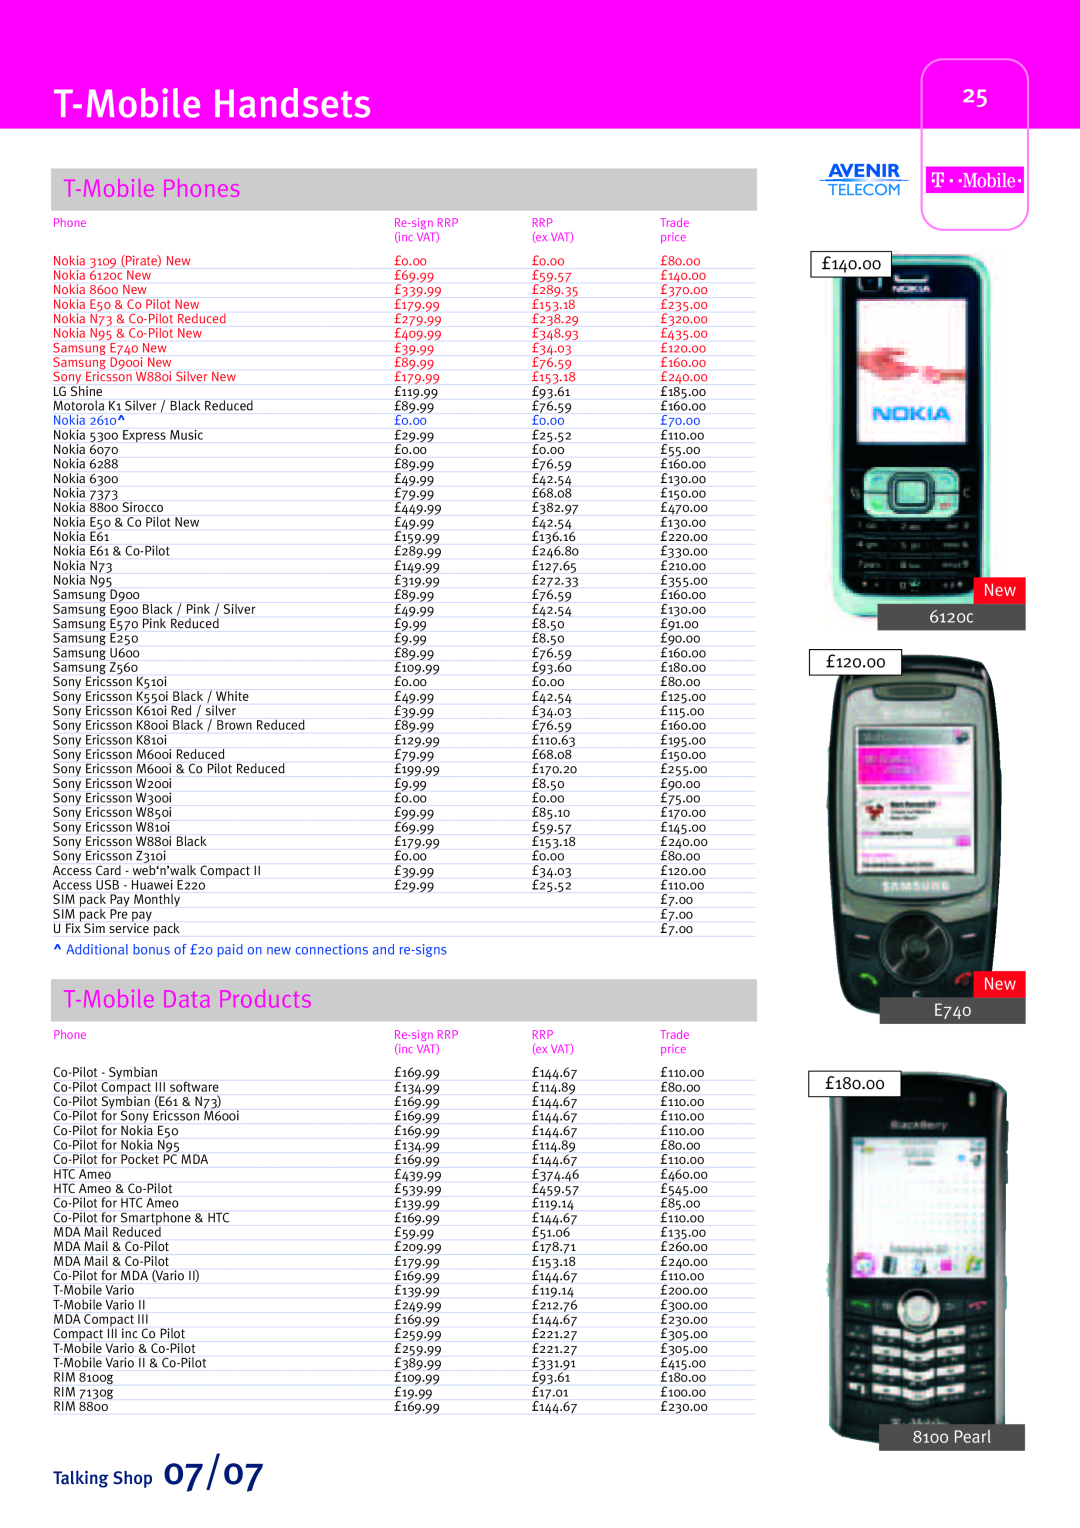 Sony Ericsson W580i T-Mobile Handsets, T-Mobile Phones, T-Mobile Data Products, Talking Shop 07/07, New 6120c, New E740 